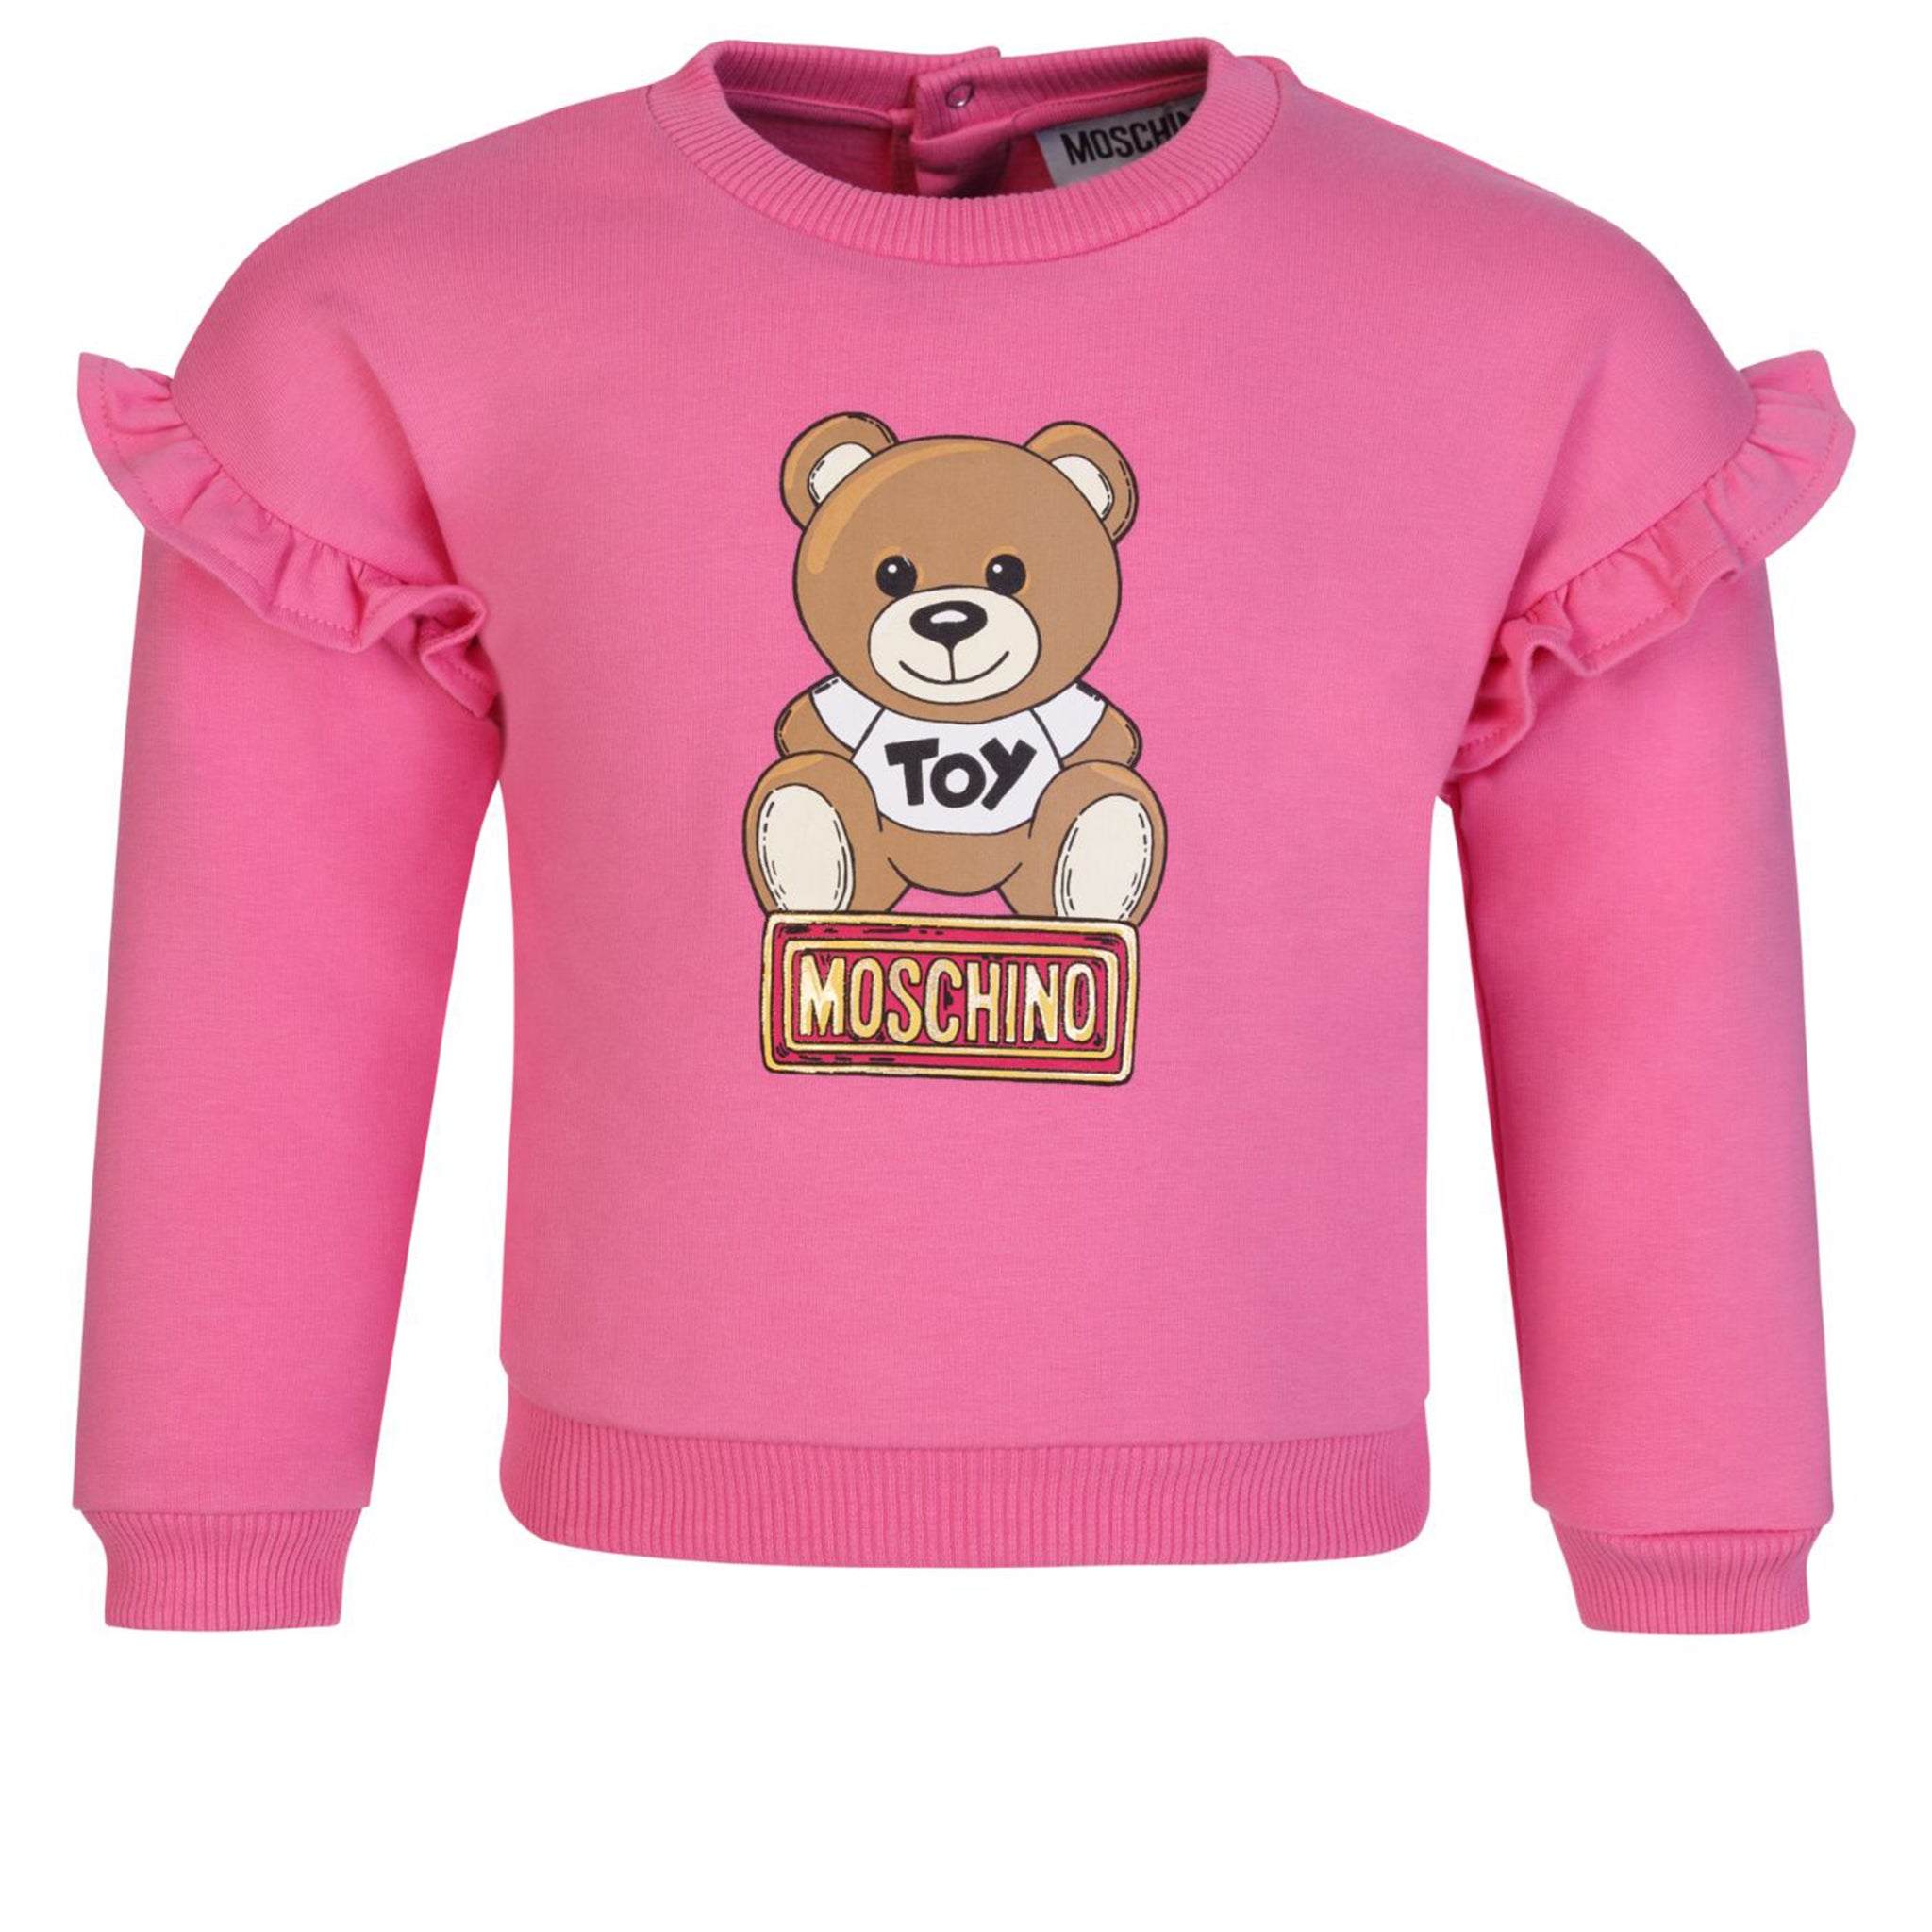 Moschino Baby Girls Tracksuit Set in Pink